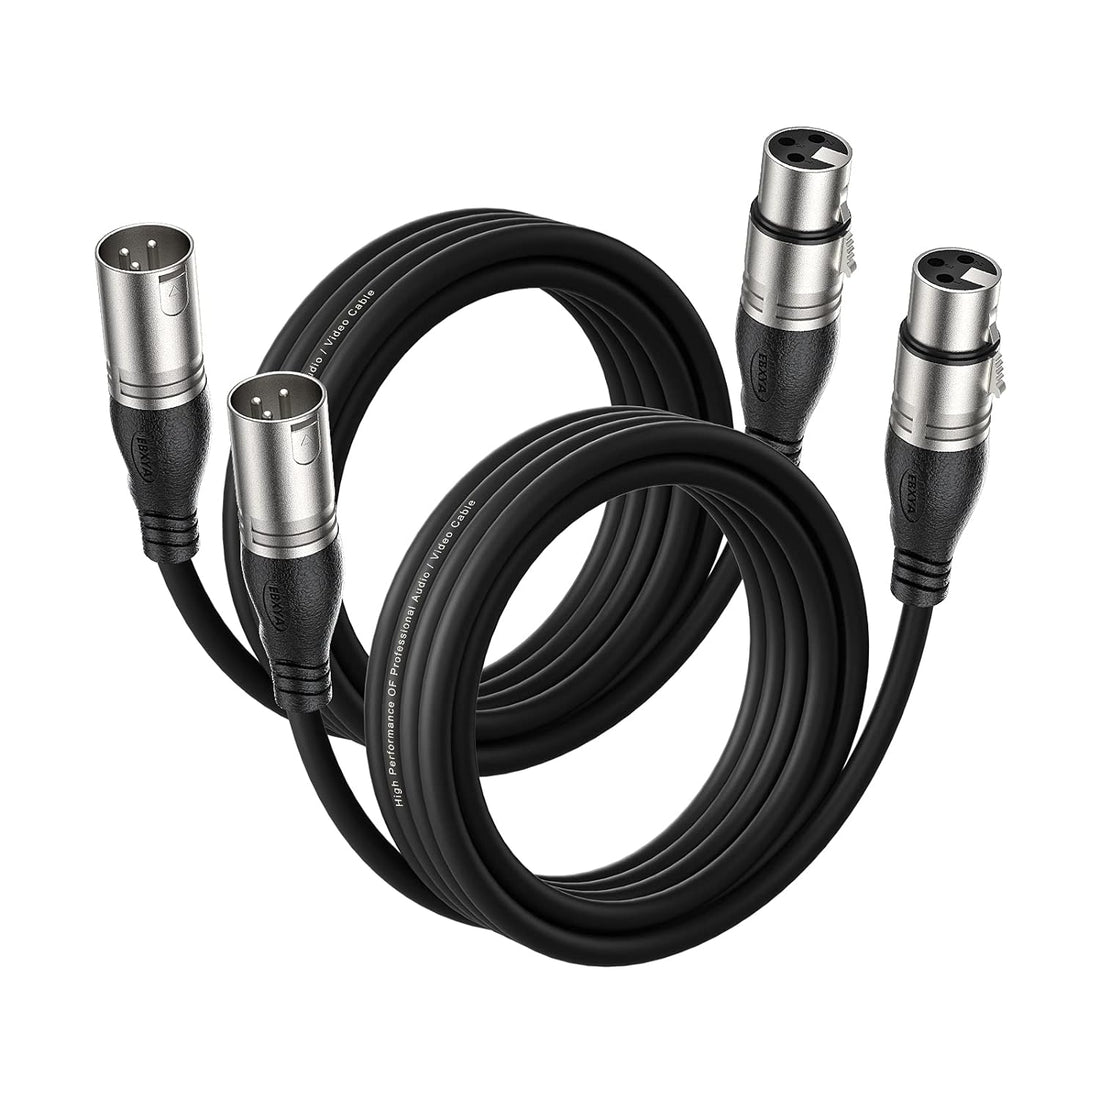 EBXYA XLR Microphone Cables 3ft 2 Packs- 3 Pins XLR Male to Female Mic Balanced Cable, Black